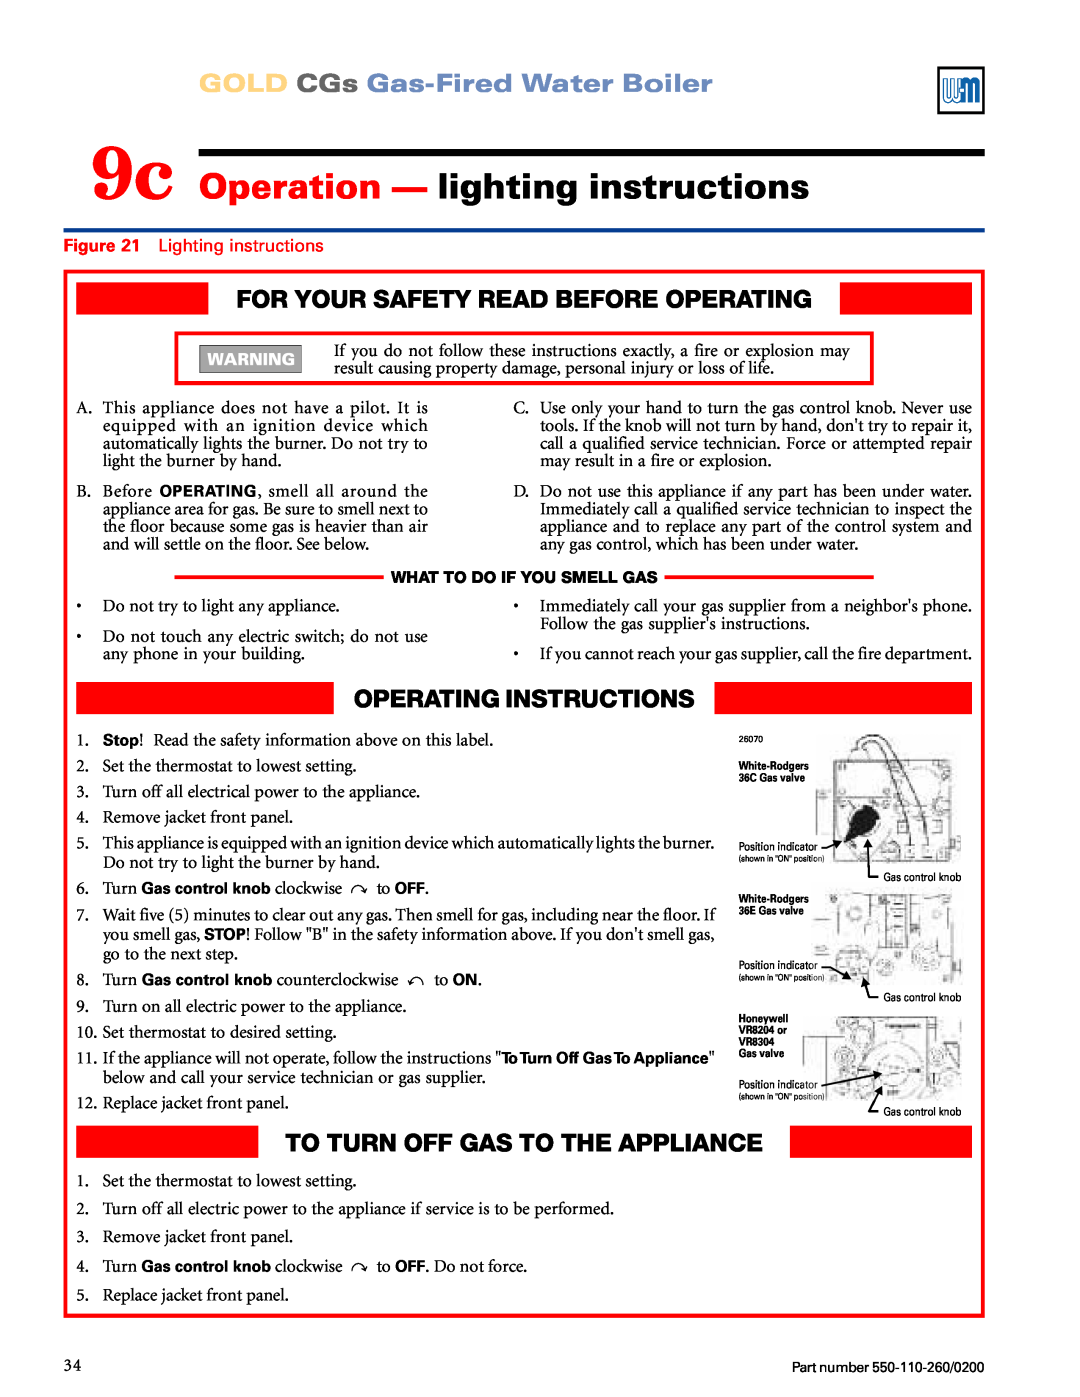 Weil-McLain 550-110-260/02002 manual 9c Operation - lighting instructions, For Your Safety Read Before Operating 